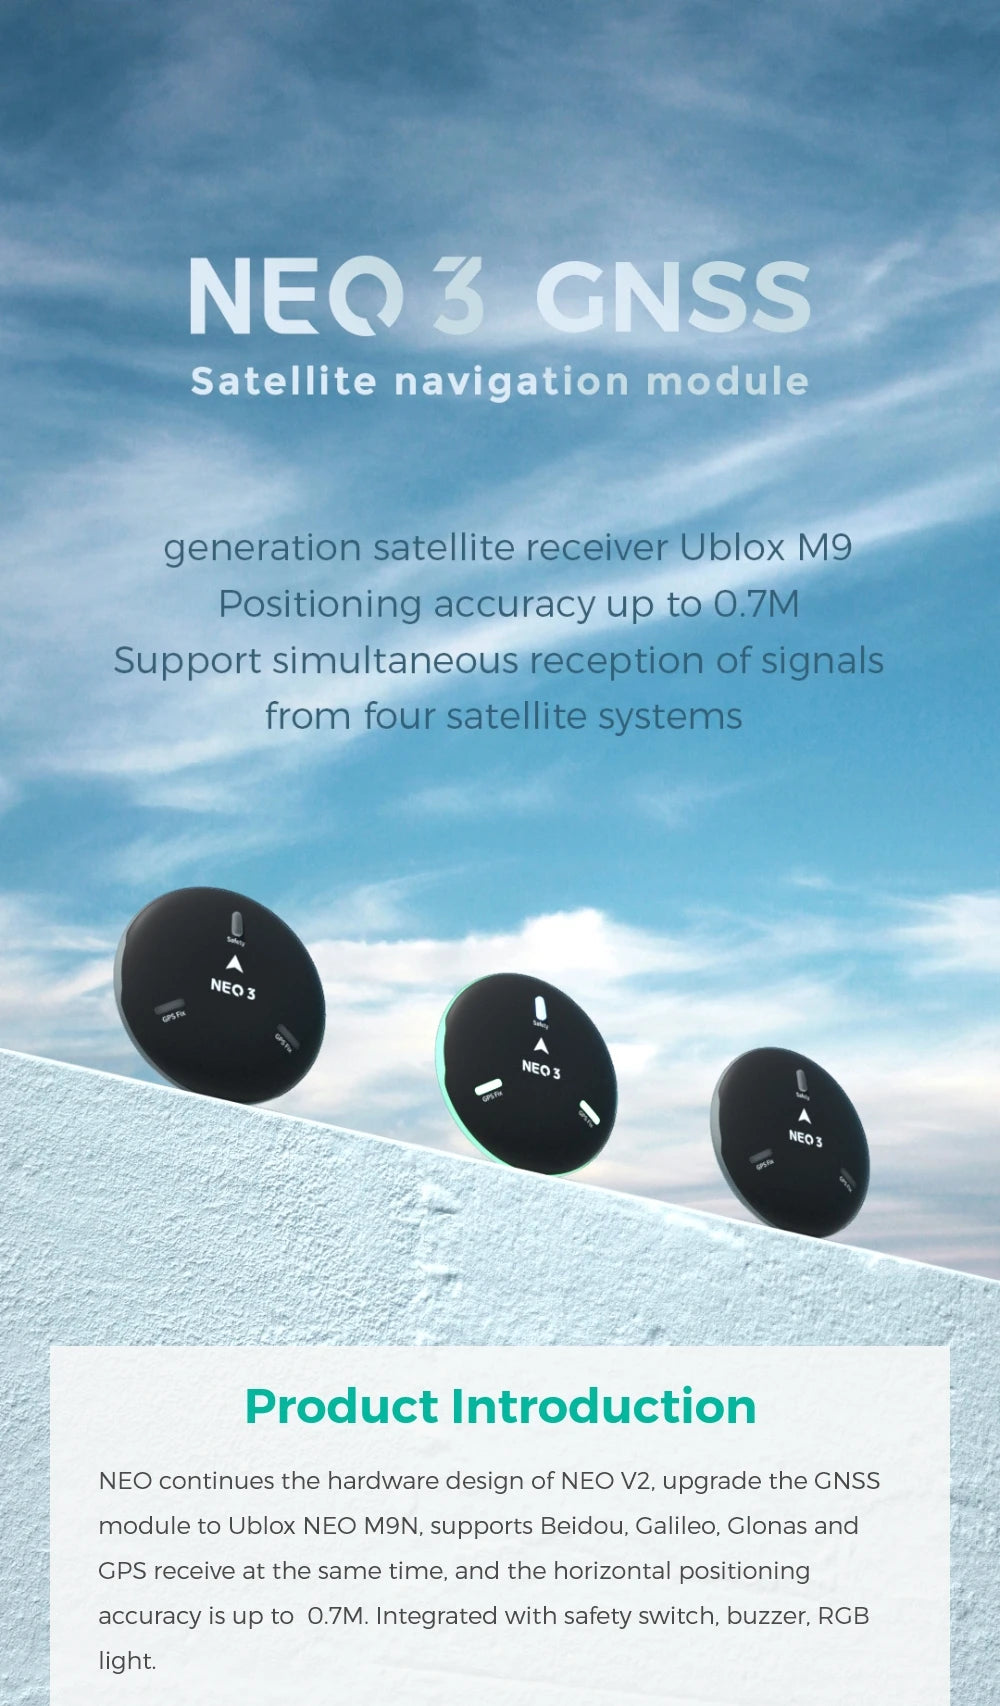 CUAV NEO 3 U-BLOX GNSS GPS, NEO continues the hardware design of NEO VZ, upgrade the GNSS module to